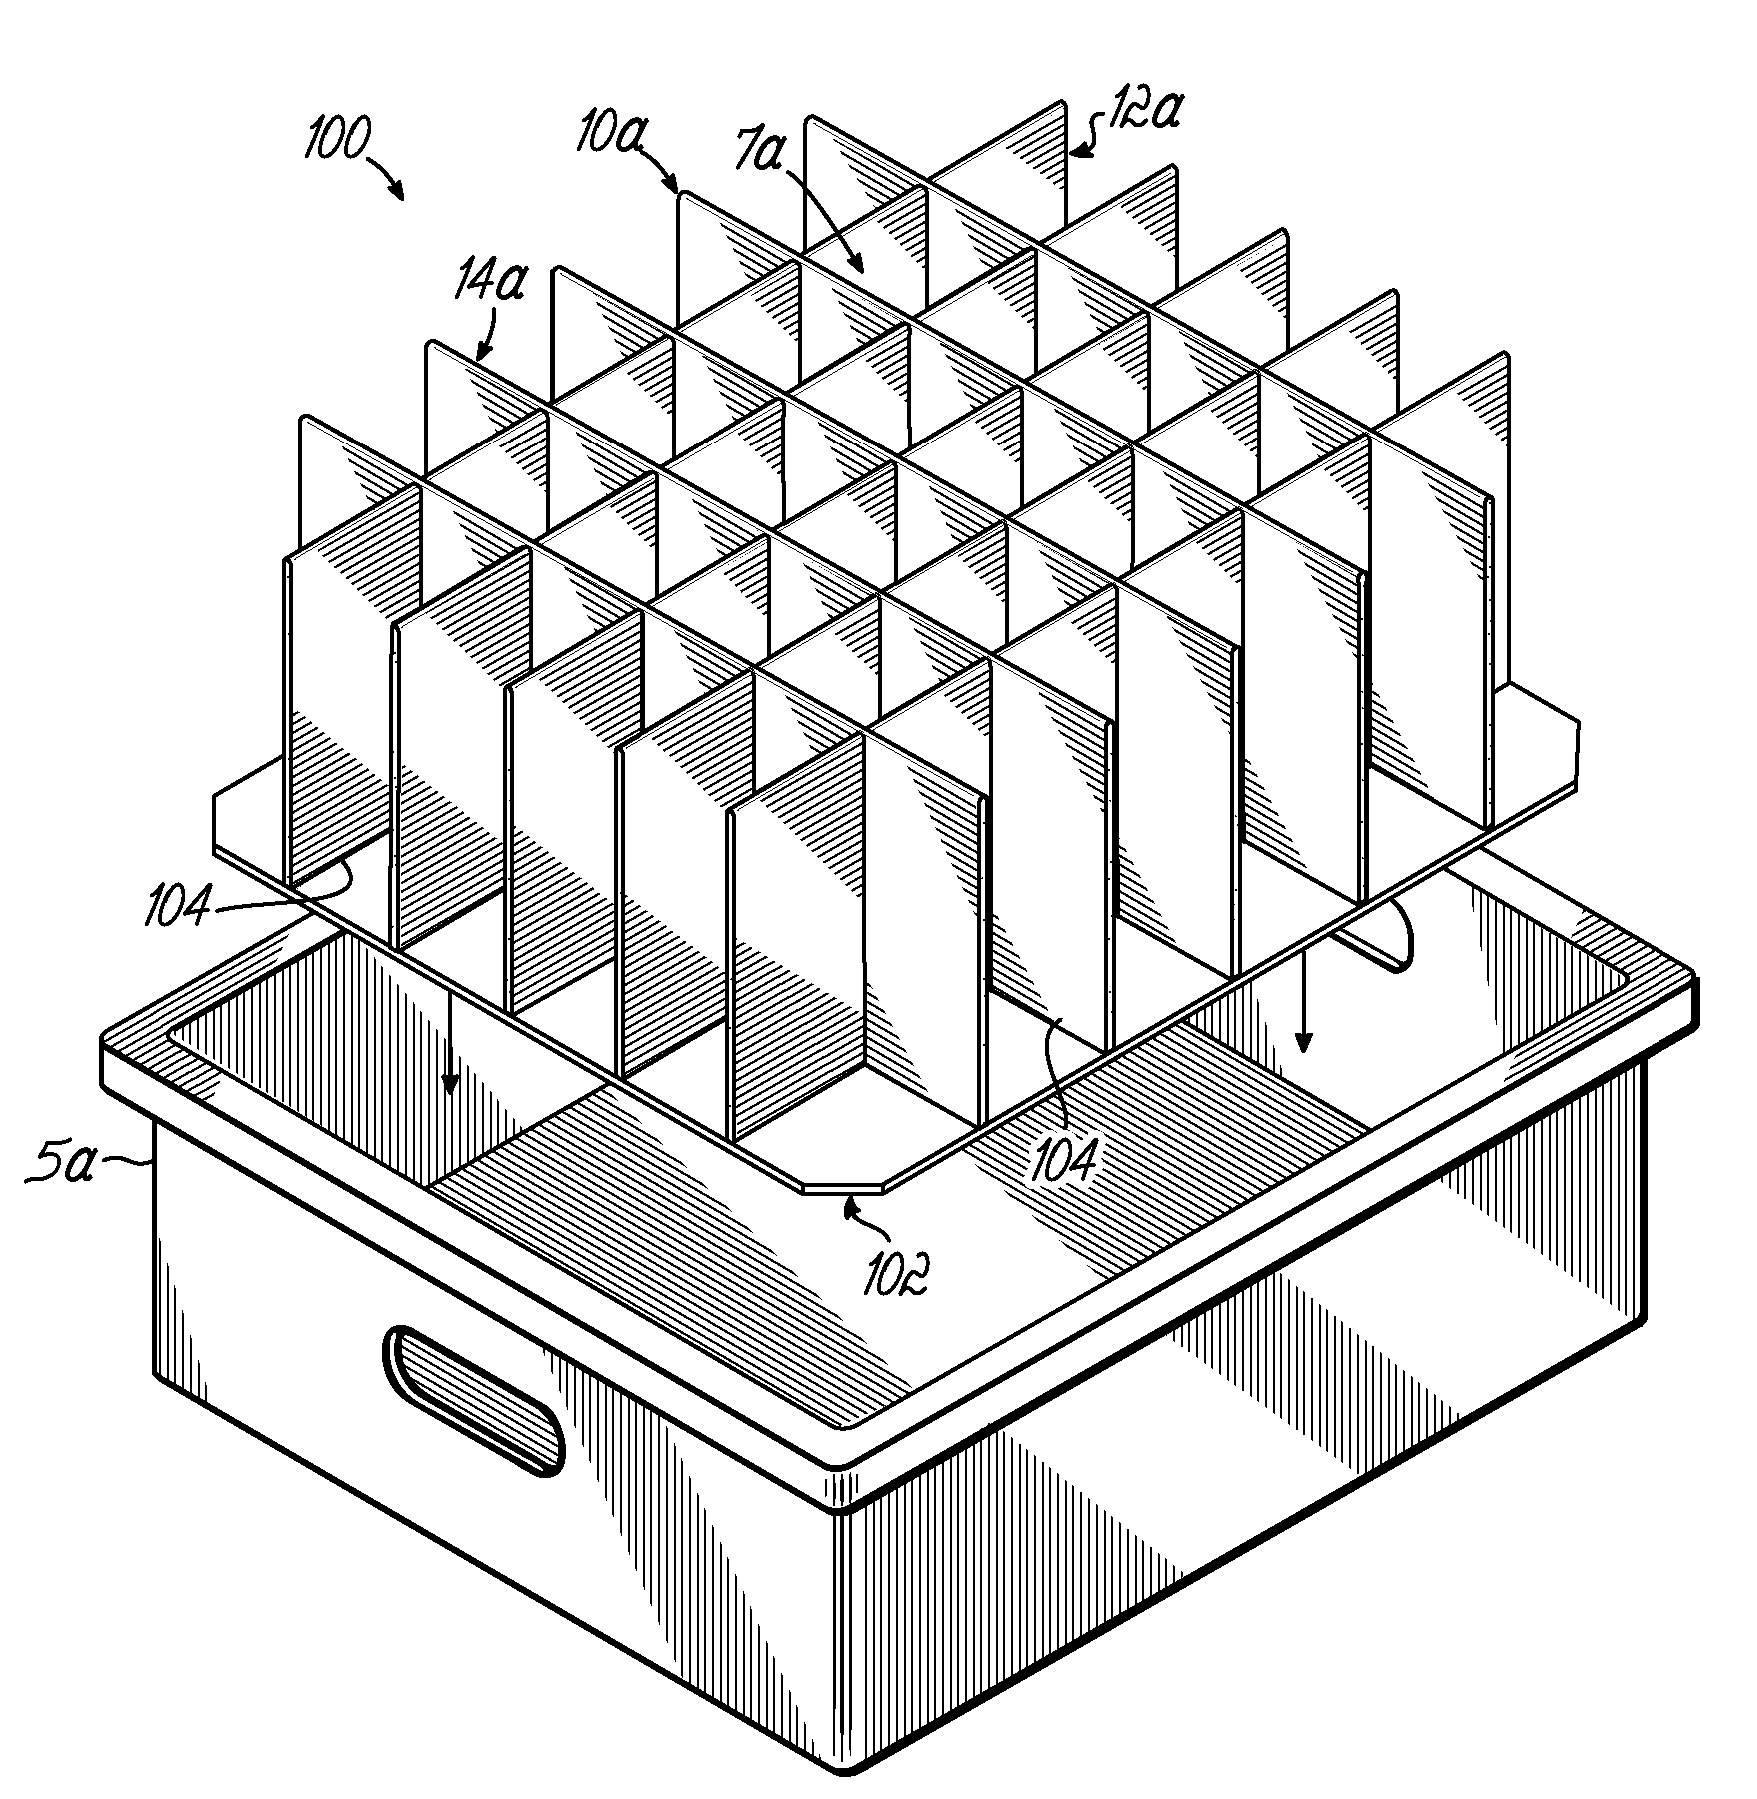 Method of Forming Partition Assembly Having Floor Parent Welded to Partitions